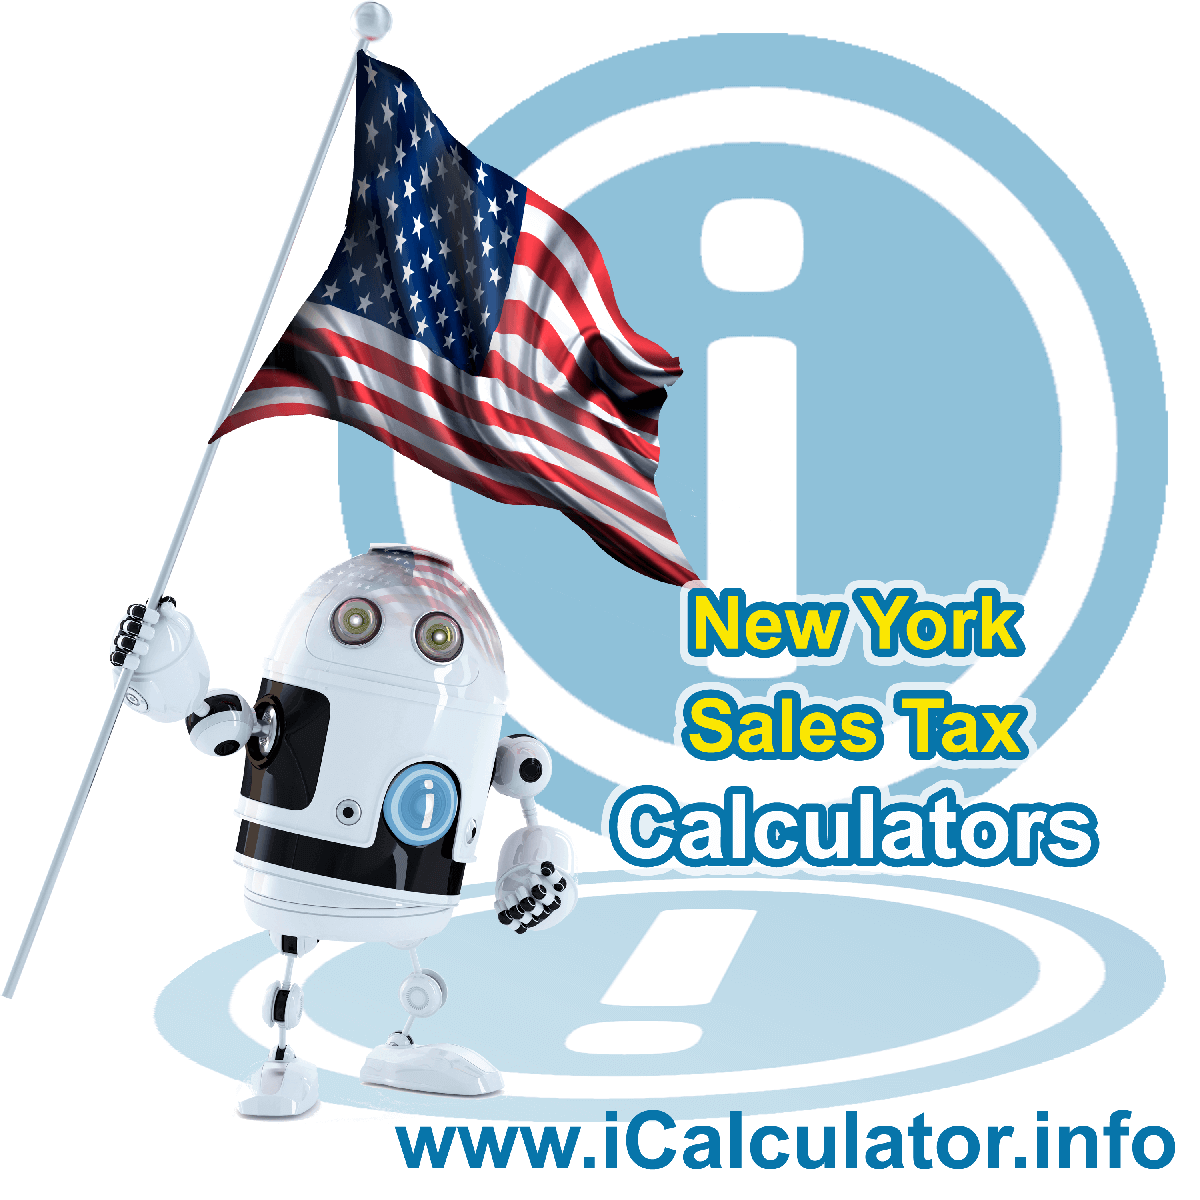 Allegany County, New York Sales Tax Comparison Calculator: This image illustrates a calculator robot comparing sales tax in Allegany County, New York manually using the Allegany County, New York Sales Tax Formula. You can use this information to compare Sales Tax manually or use the Allegany County, New York Sales Tax Comparison Calculator to calculate and compare Allegany County, New York sales tax online.